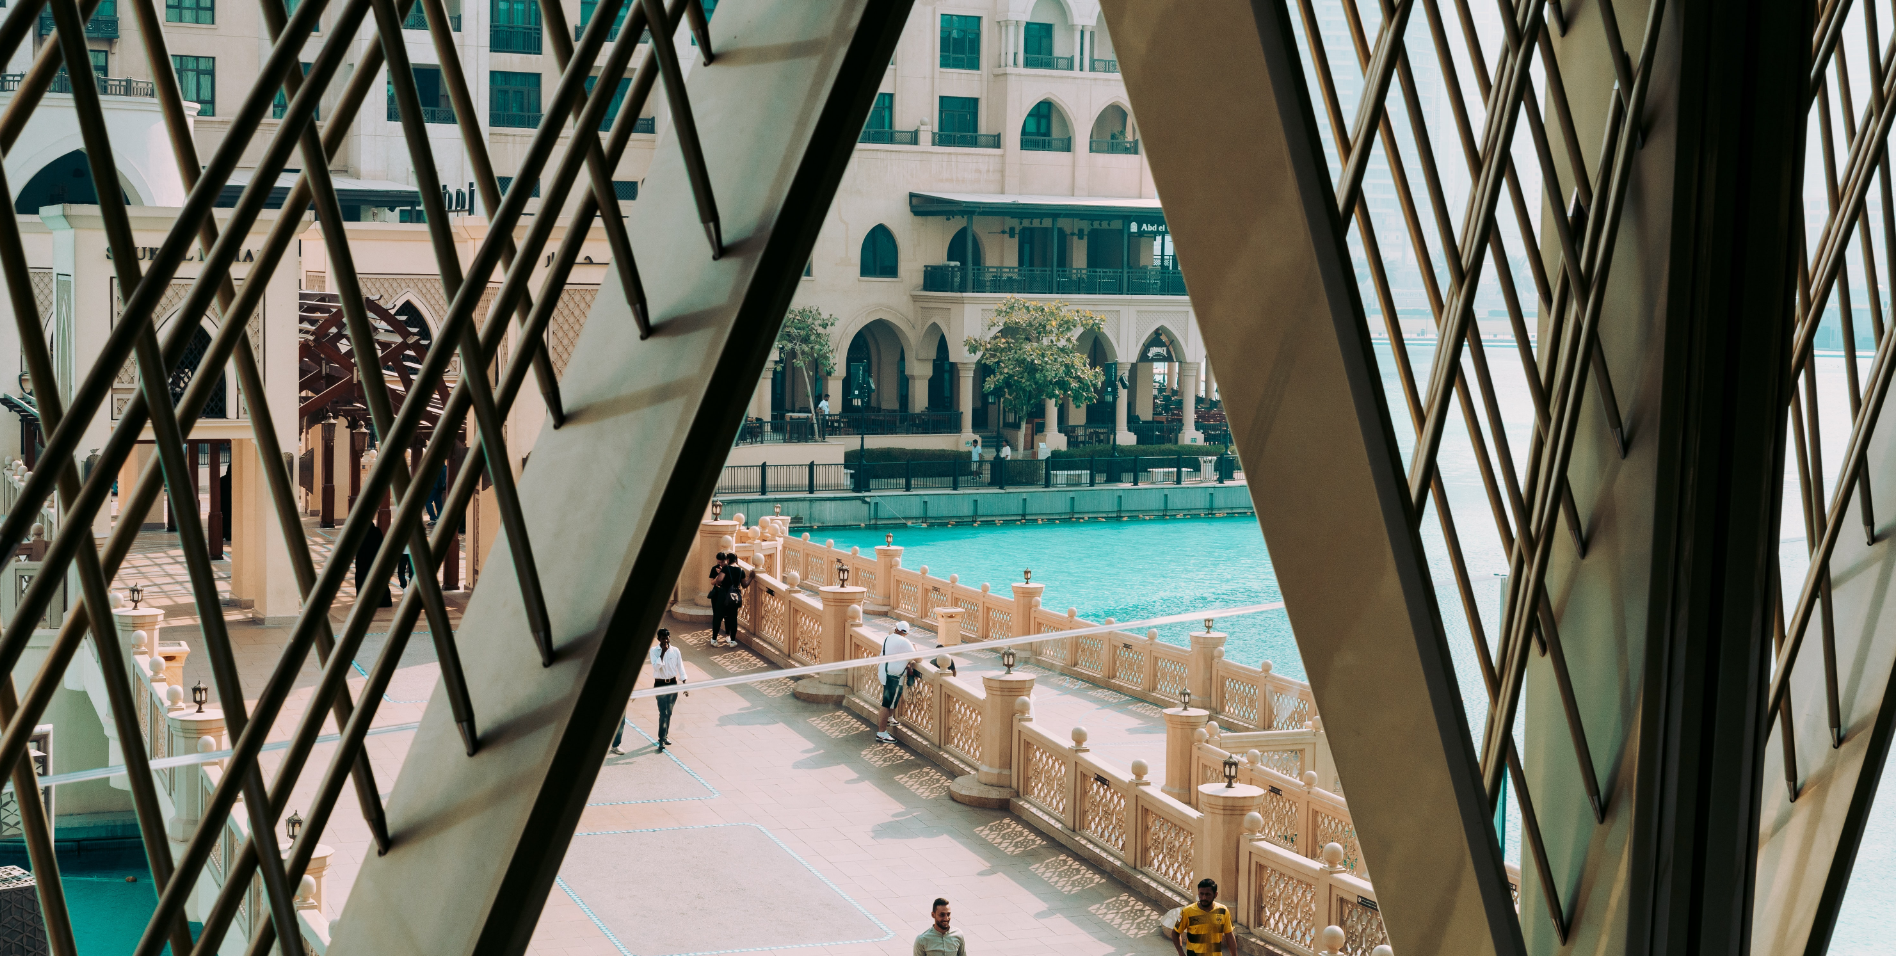 External view of Dubai mall with pool